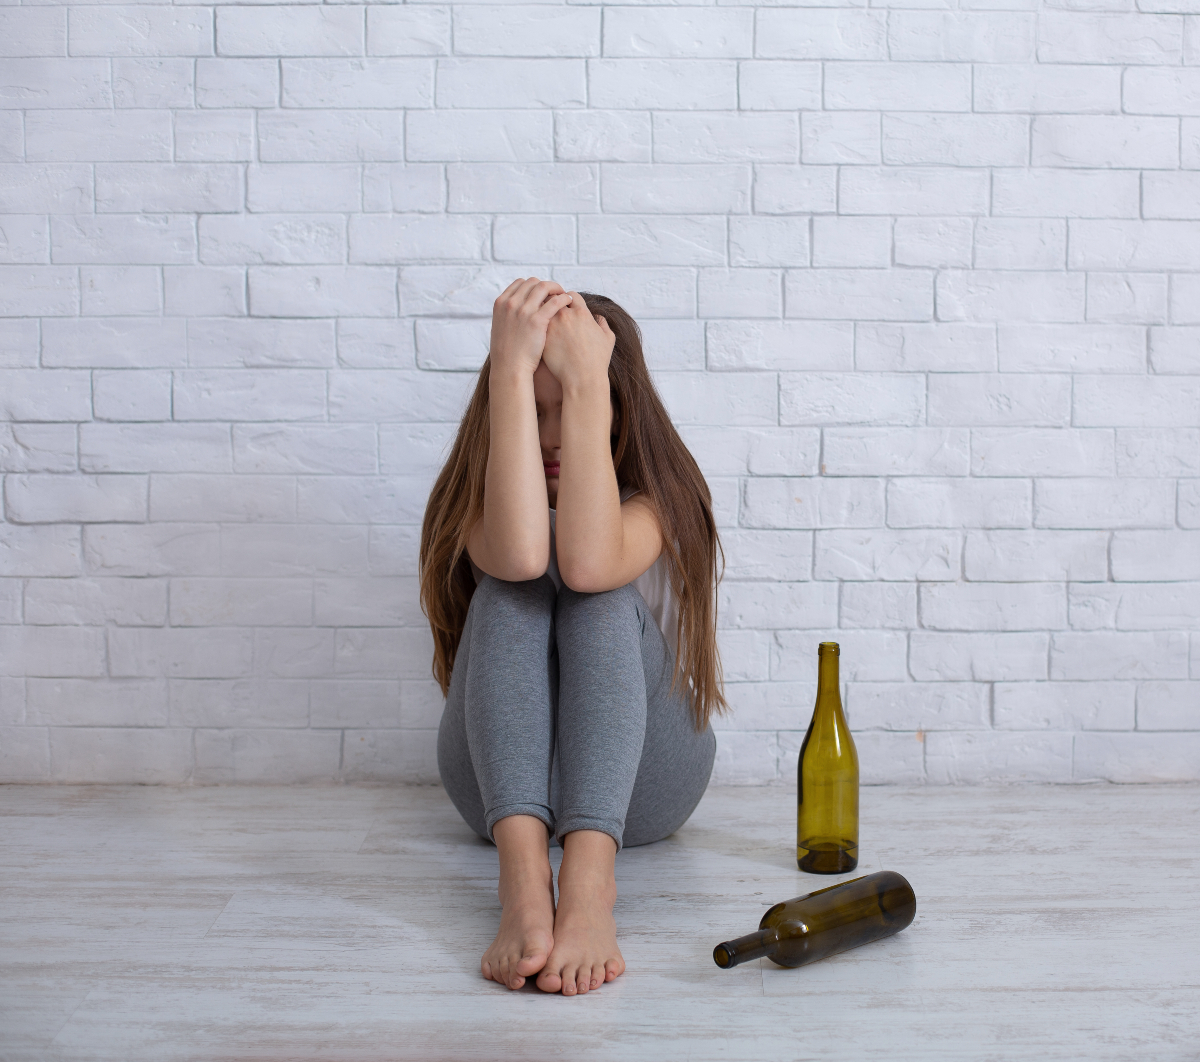 Woman struggling with alcoholism and her BPD